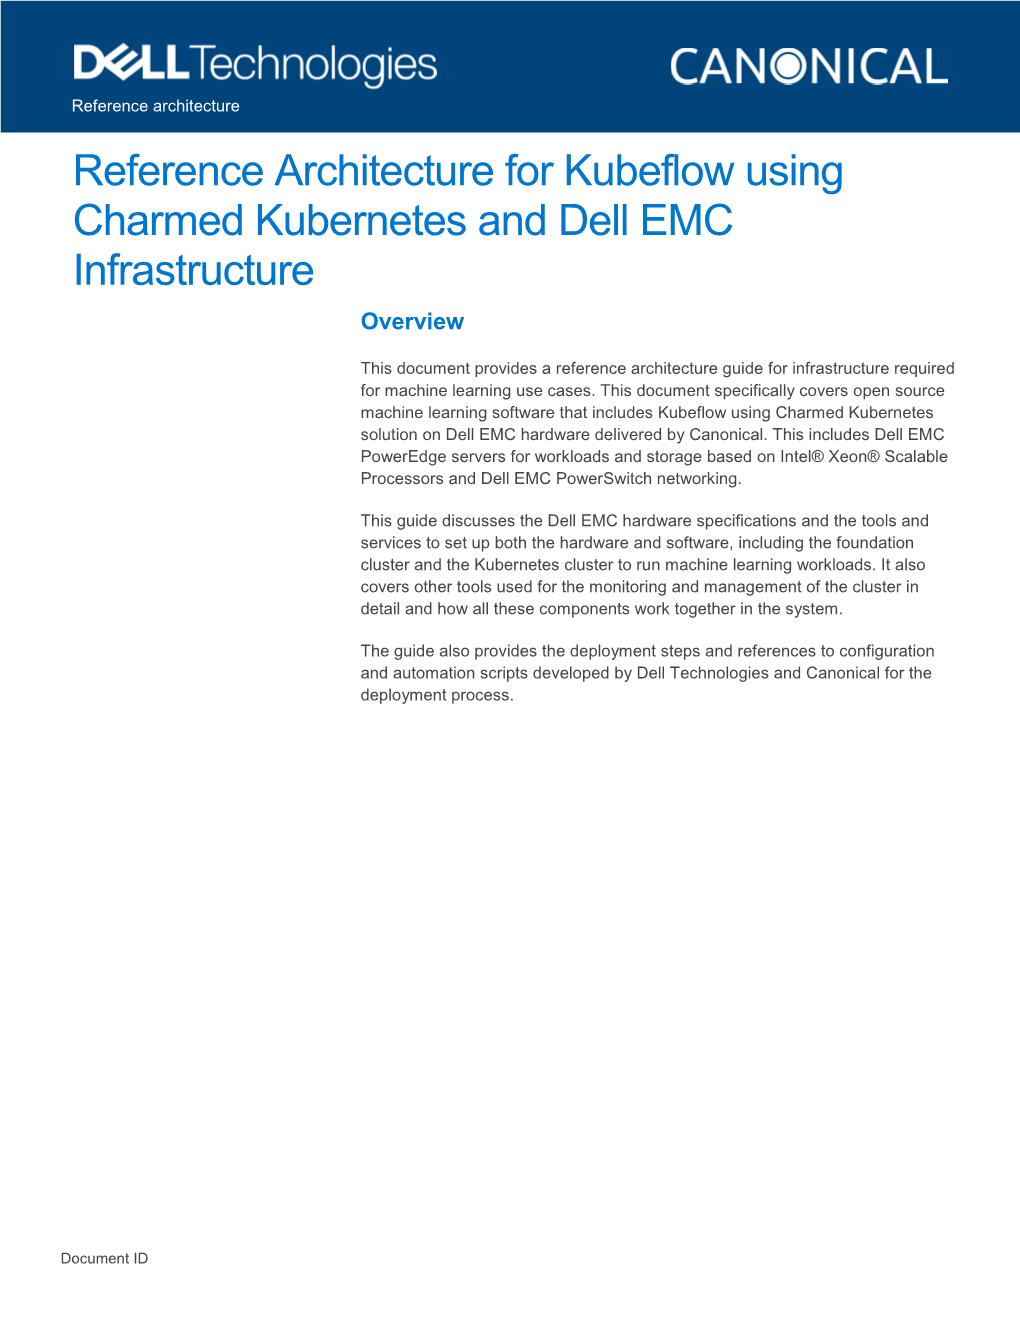 Reference Architecture for Kubeflow Using Charmed Kubernetes and Dell EMC Infrastructure Overview